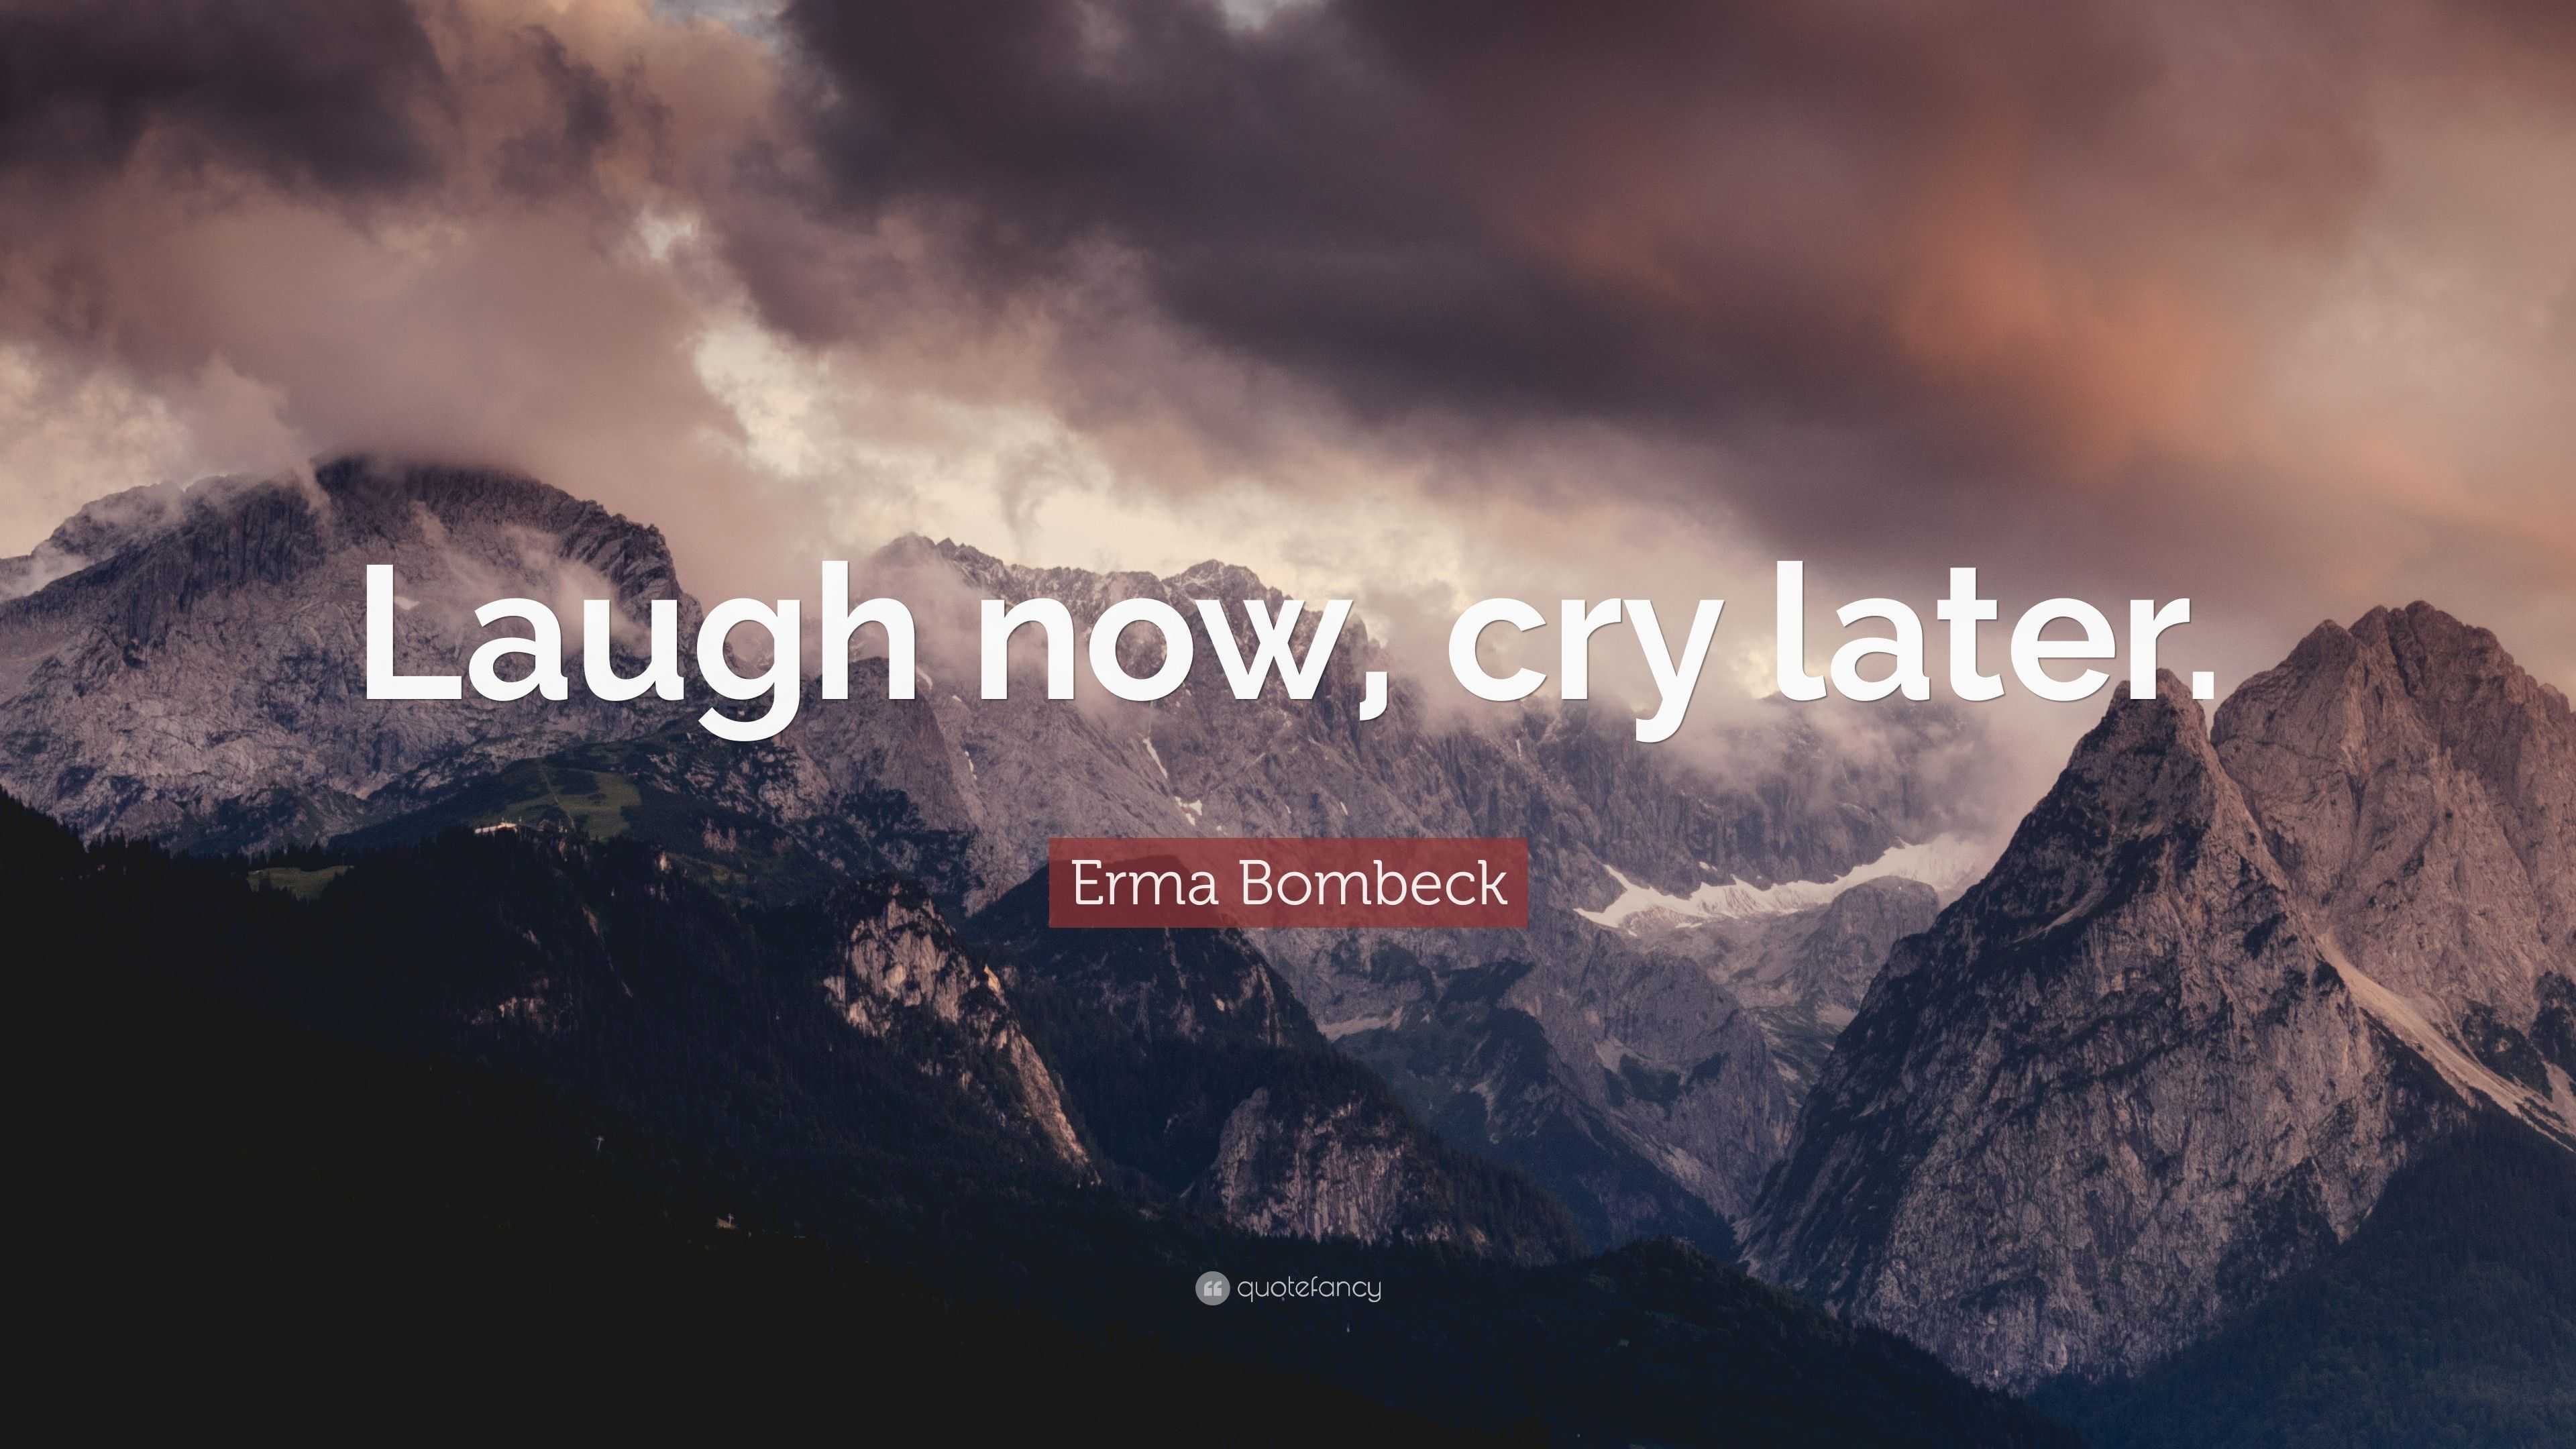 Erma Bombeck Quote: “Laugh now, cry later.”